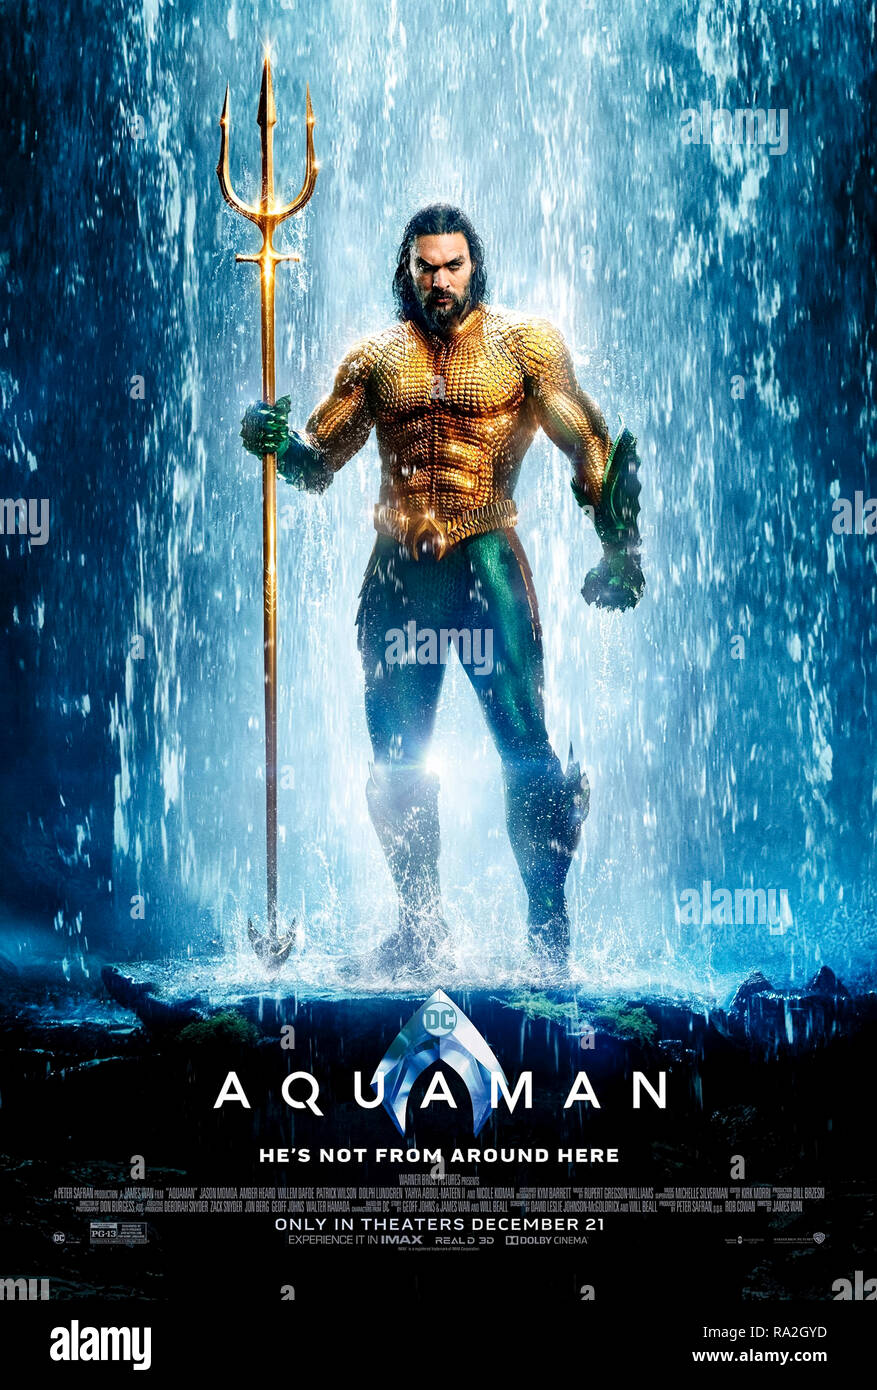 Aquaman (2018) directed by James Wan and starring Jason Momoa, Amber Heard, Nicole Kidman and Randall Park. Arthur Curry discovers he is the King of Atlantis also known as Aquaman. Stock Photo